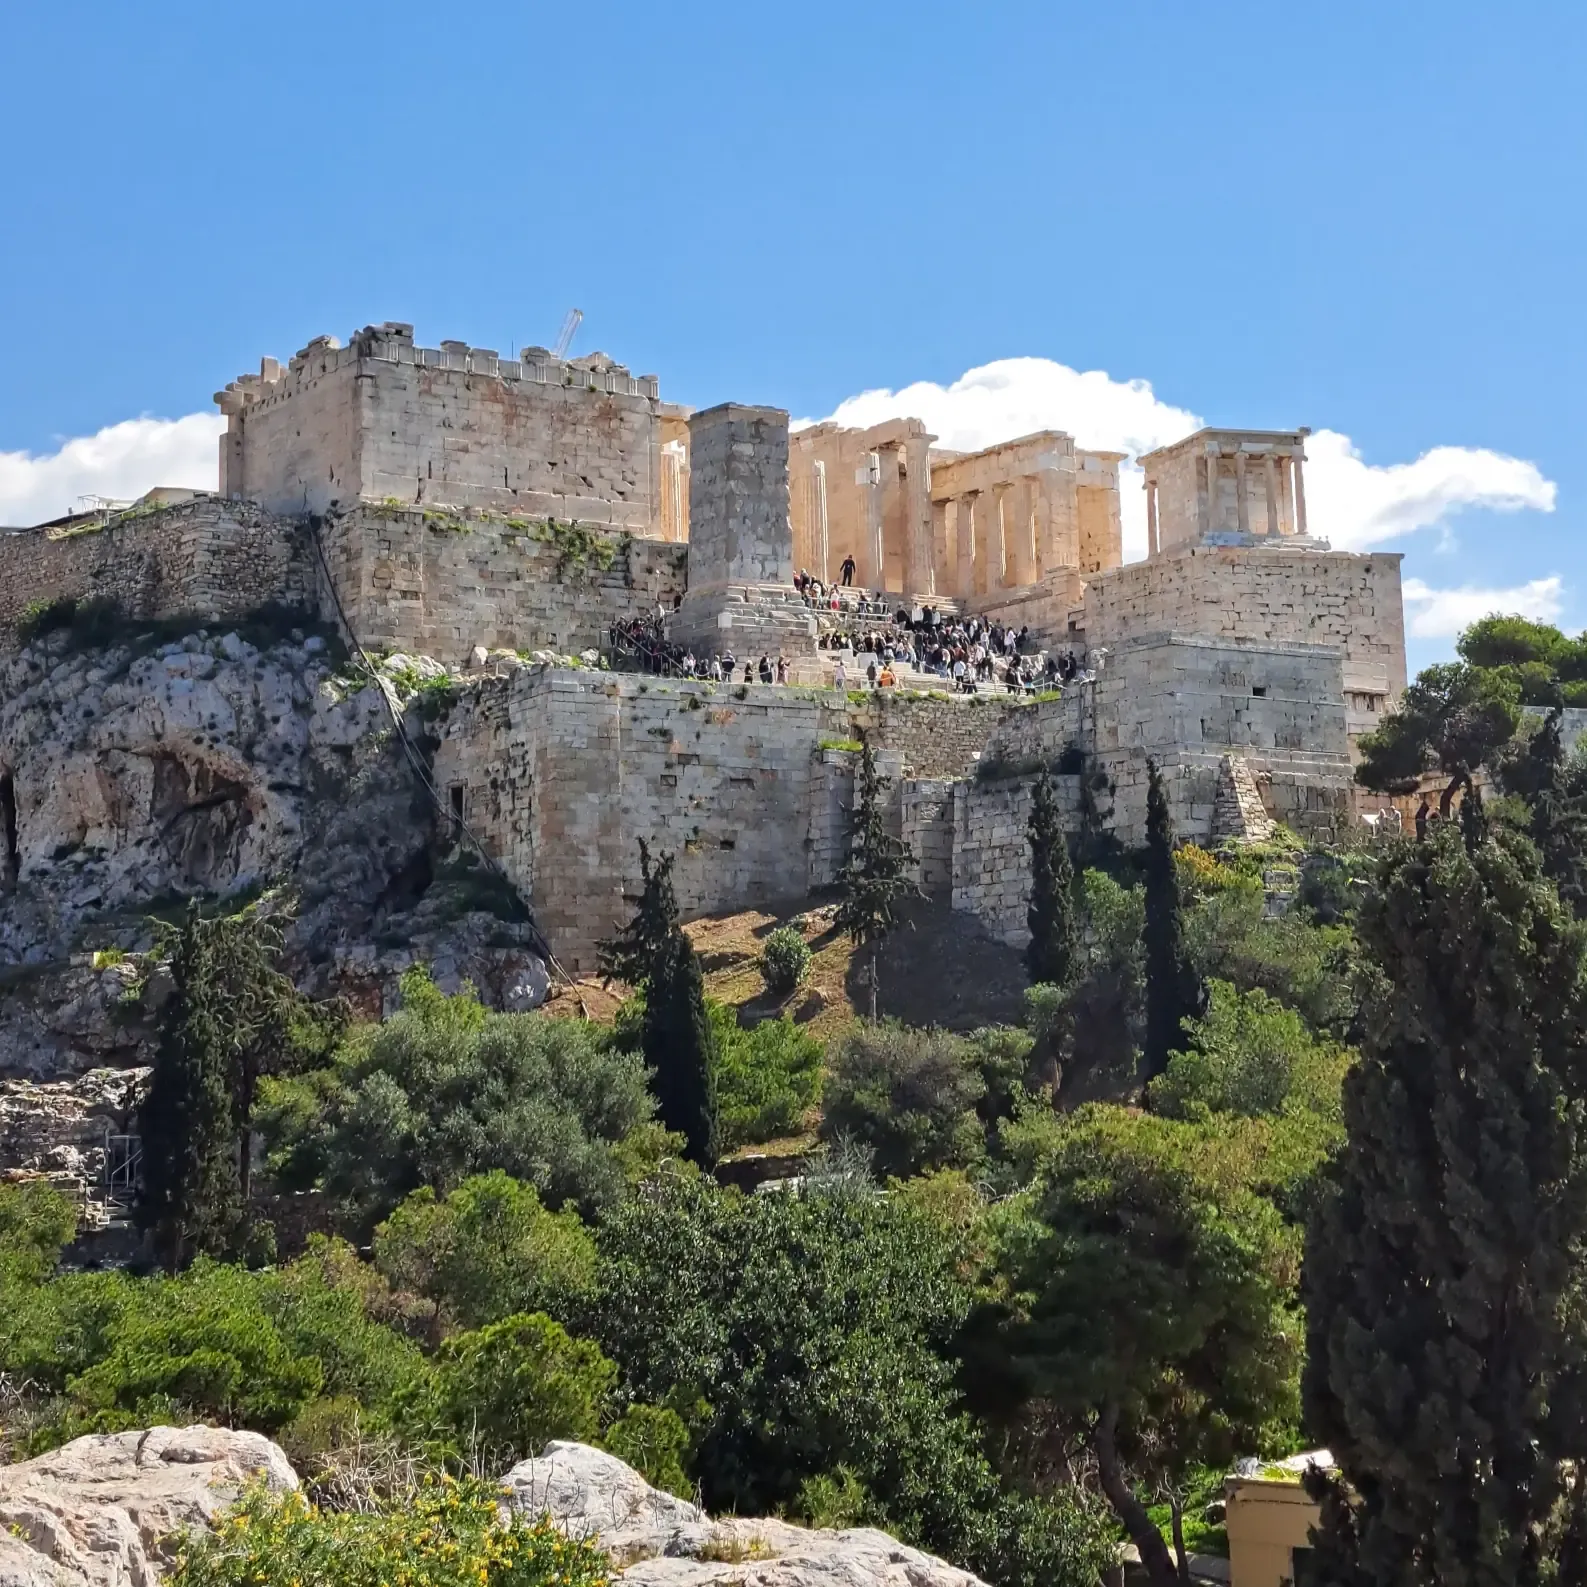 Looking at the Acropolis from Areopagus.